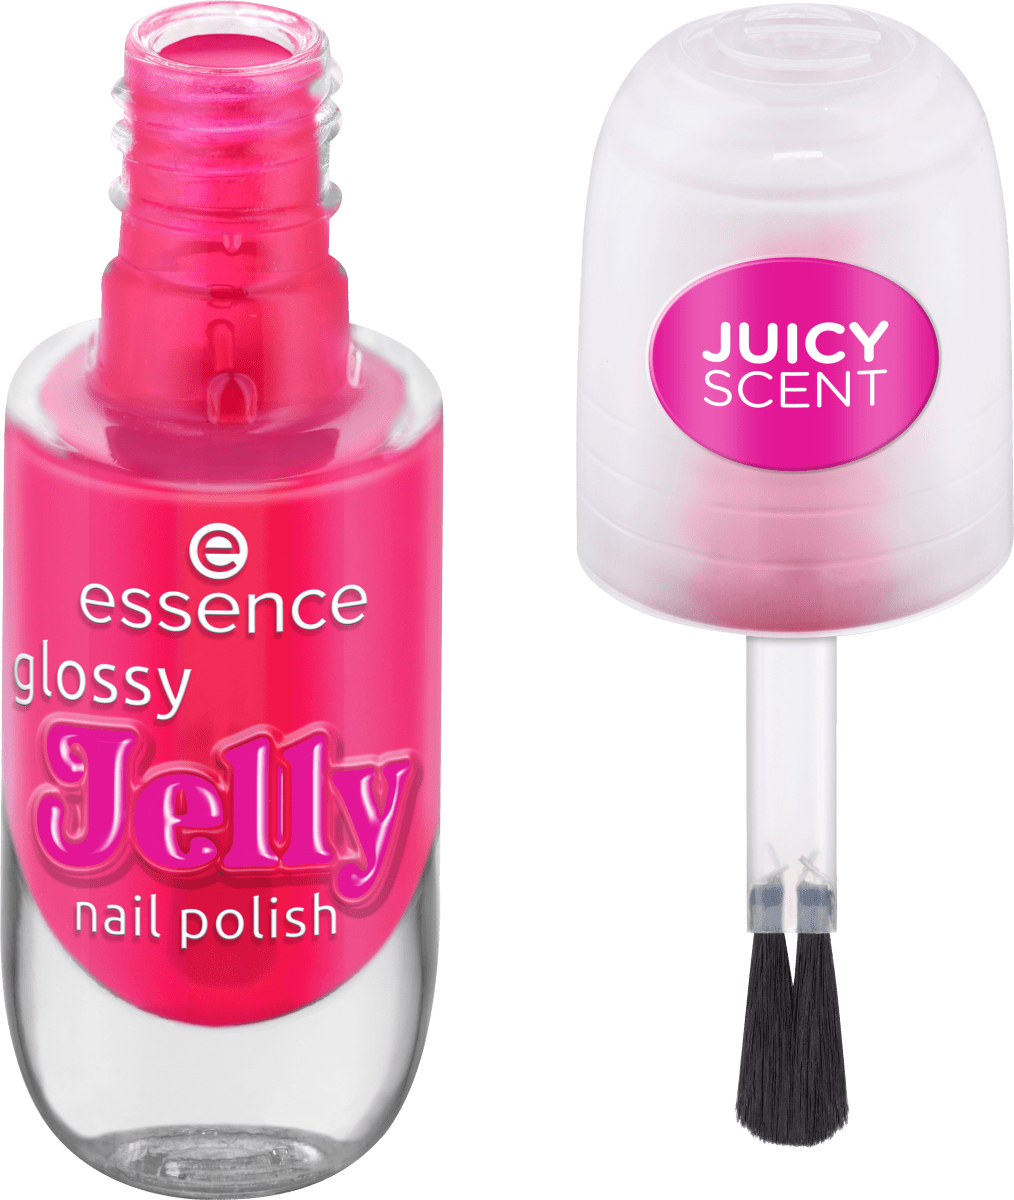 Nagellack Glossy Jelly 02 Candy Gloss 8 мл essence roshen jelly candy crazy bee 500g